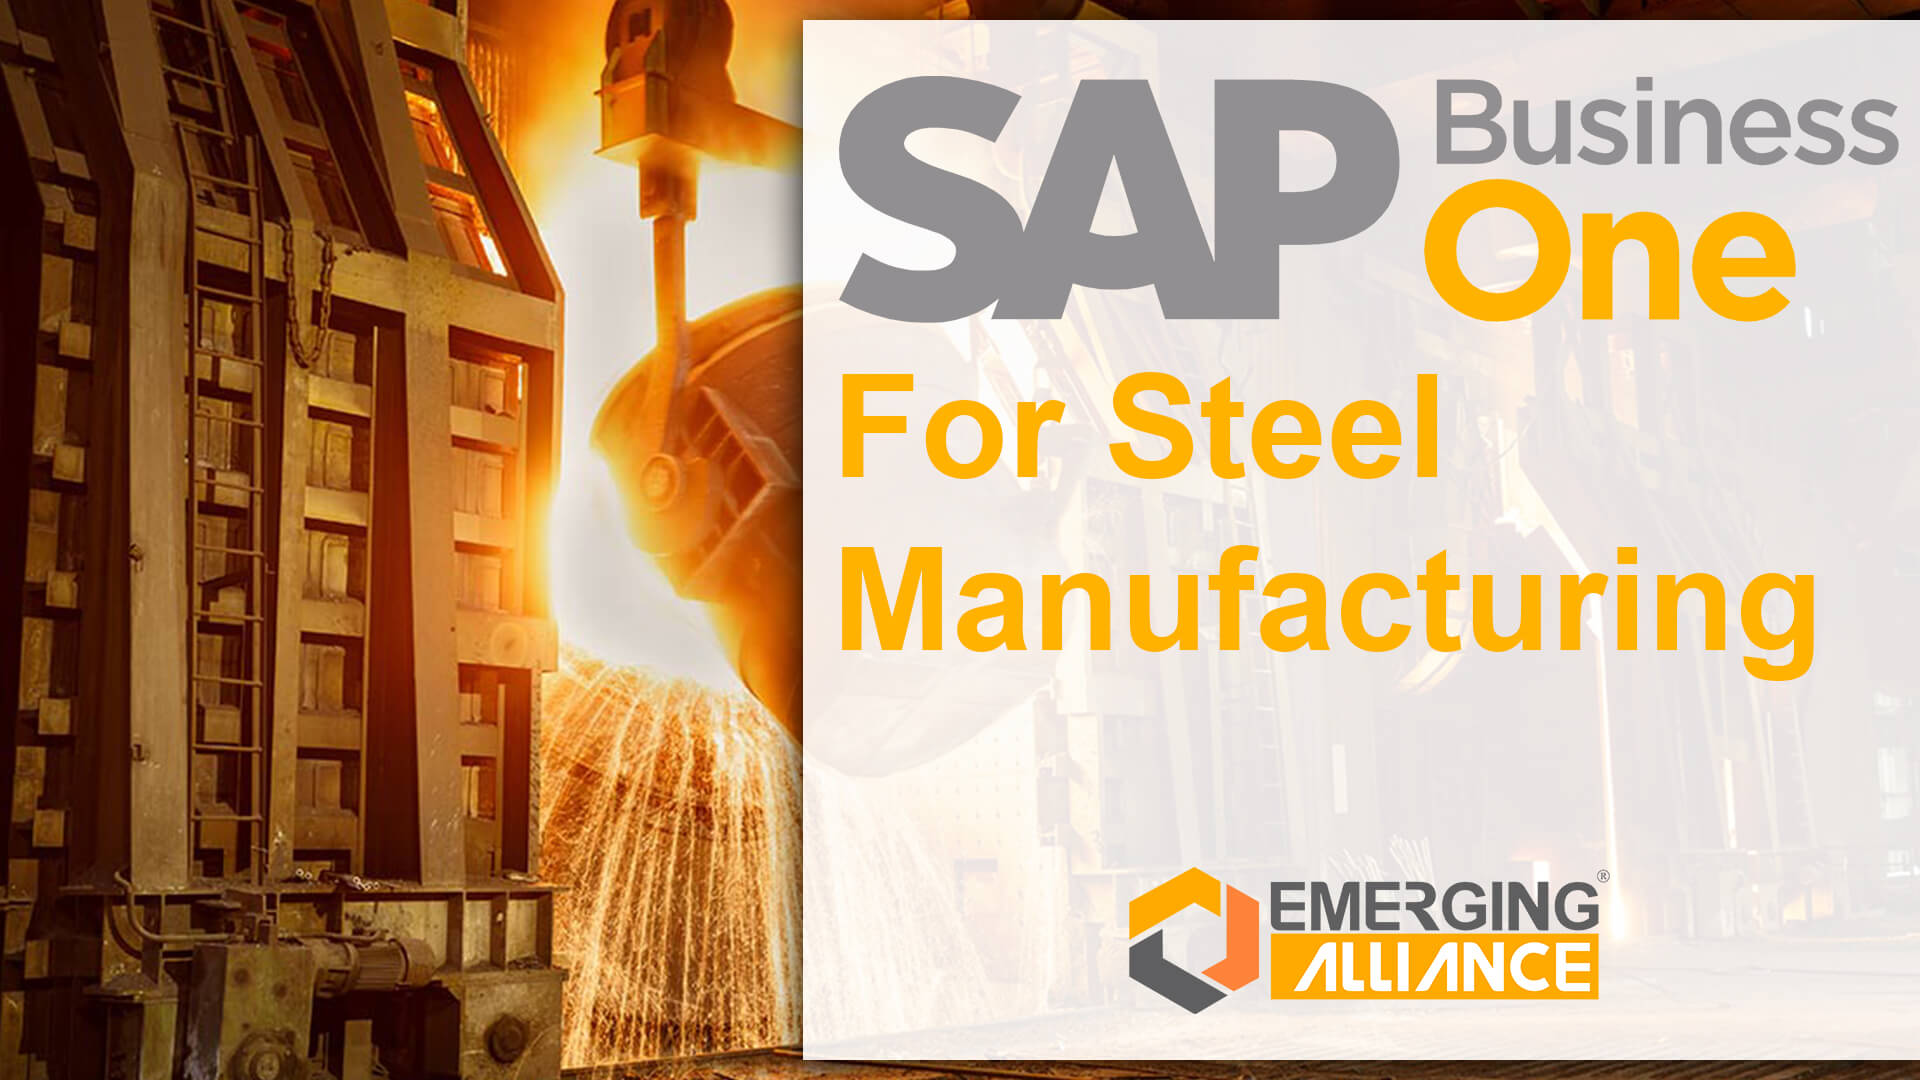 sap business one for steel manufacturing